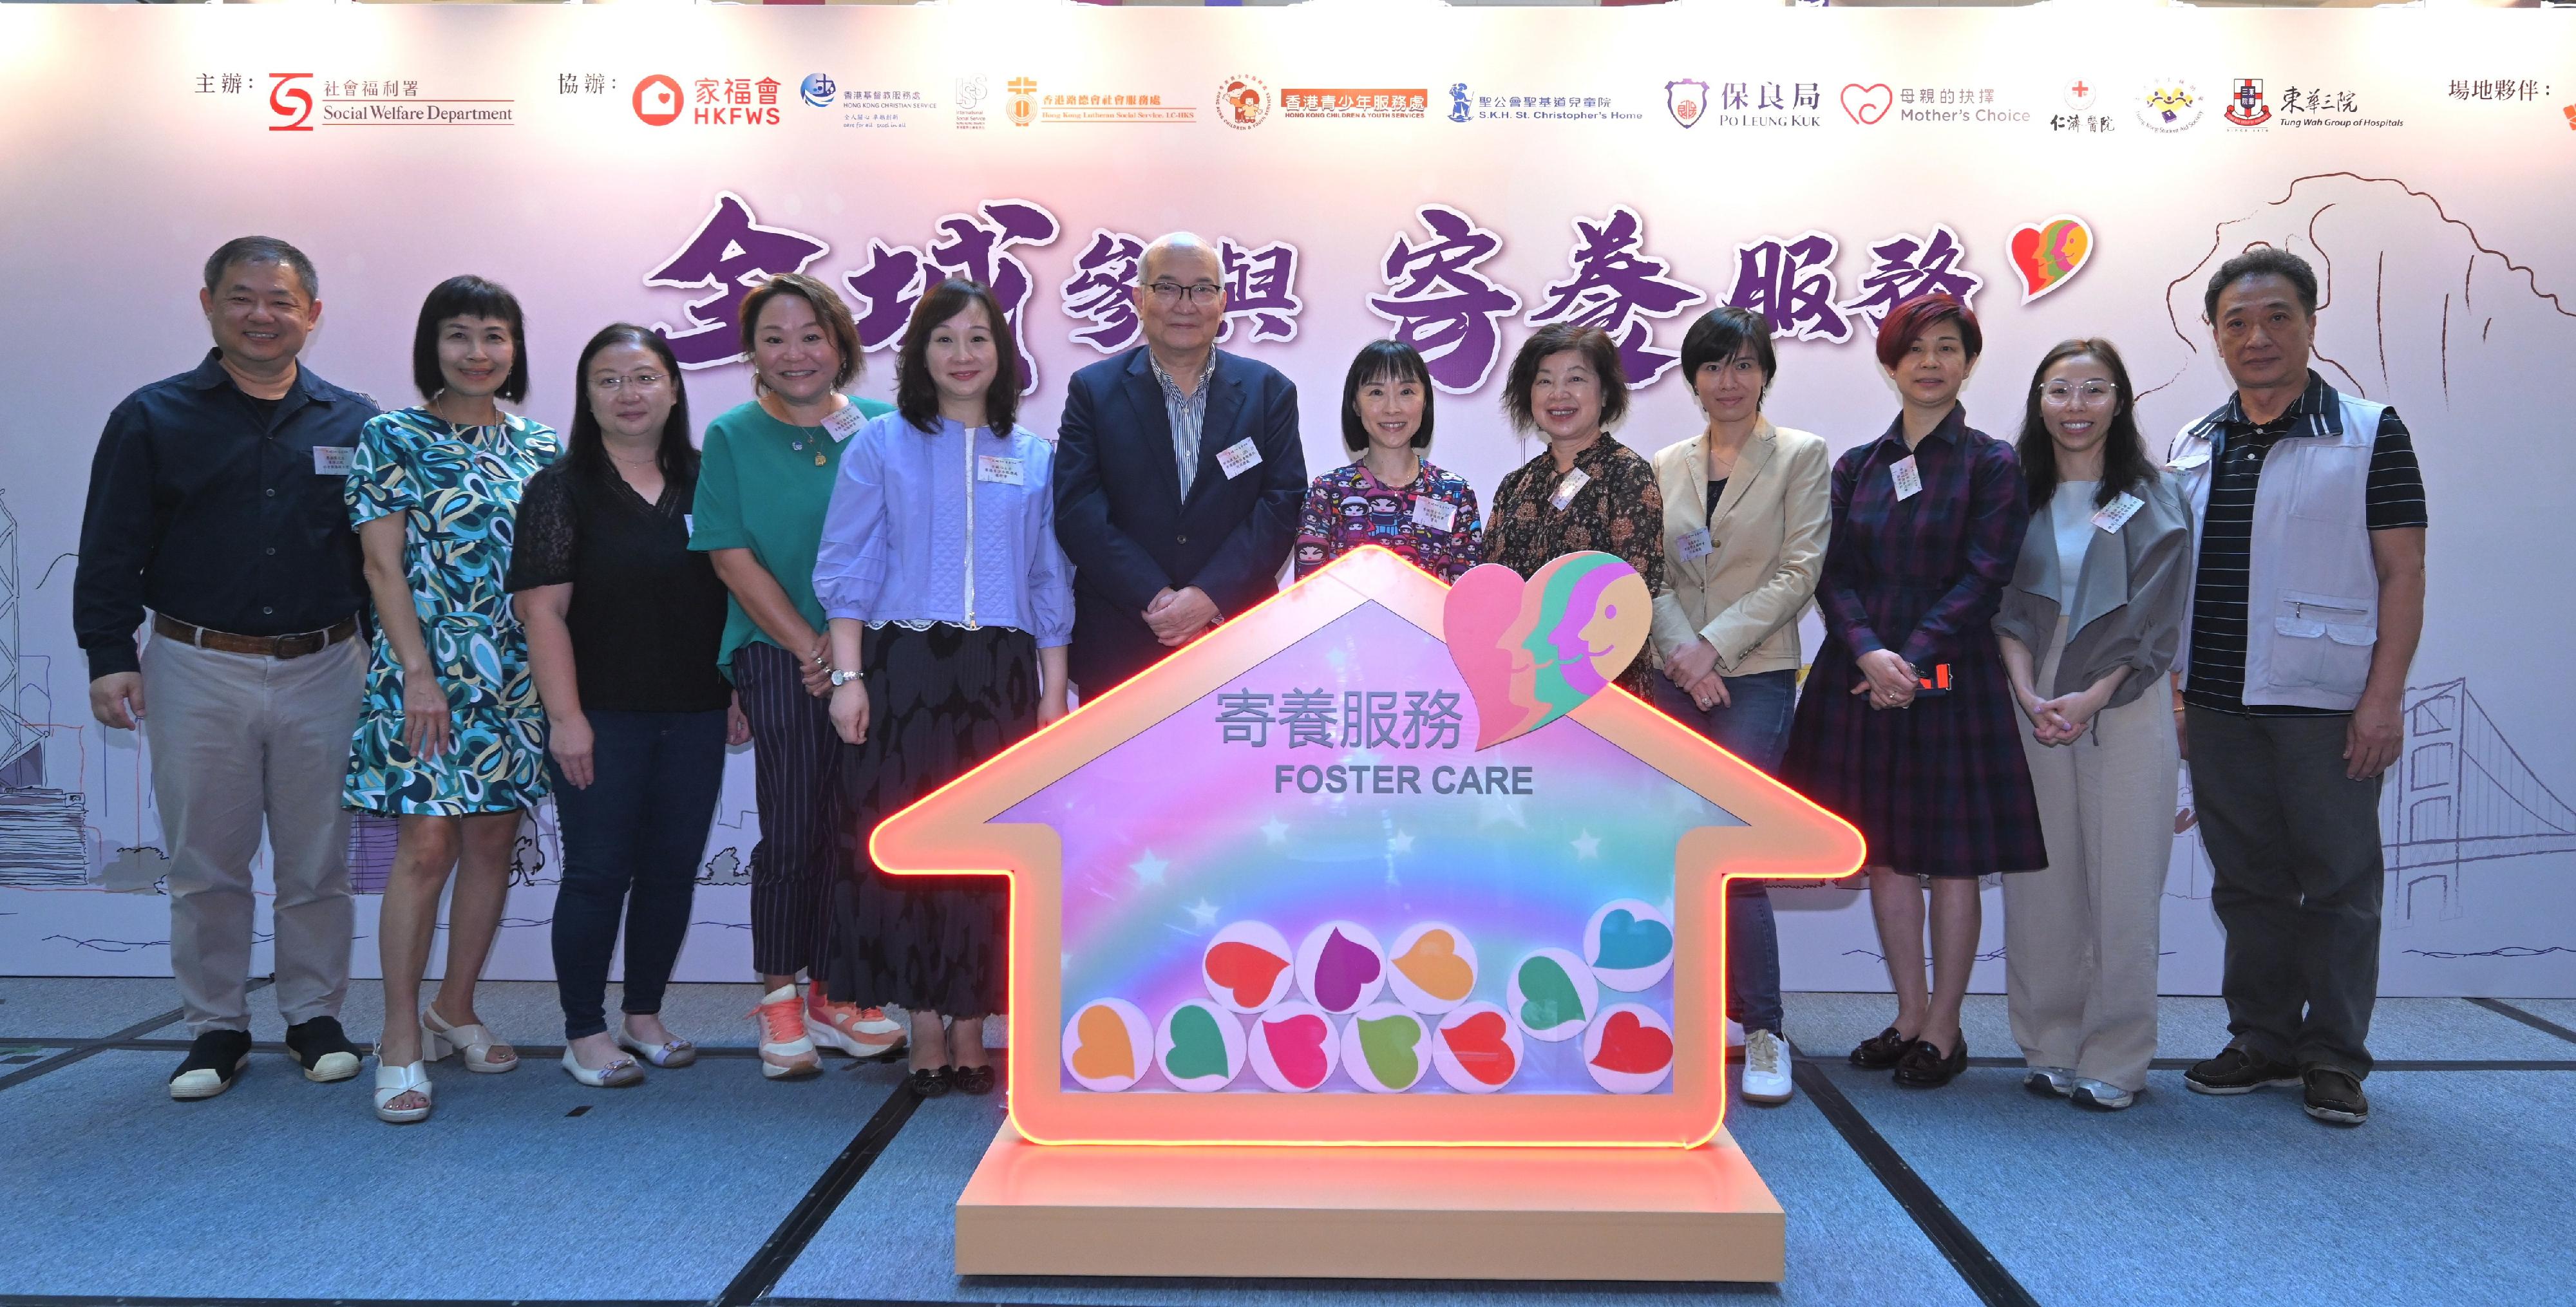 The Let's Join Foster Care Service event was organised by the Social Welfare Department and co-organised by 11 foster care agencies. Photo shows the Director of Social Welfare, Miss Charmaine Lee (sixth right), pictured with the representatives from the agencies at the event.